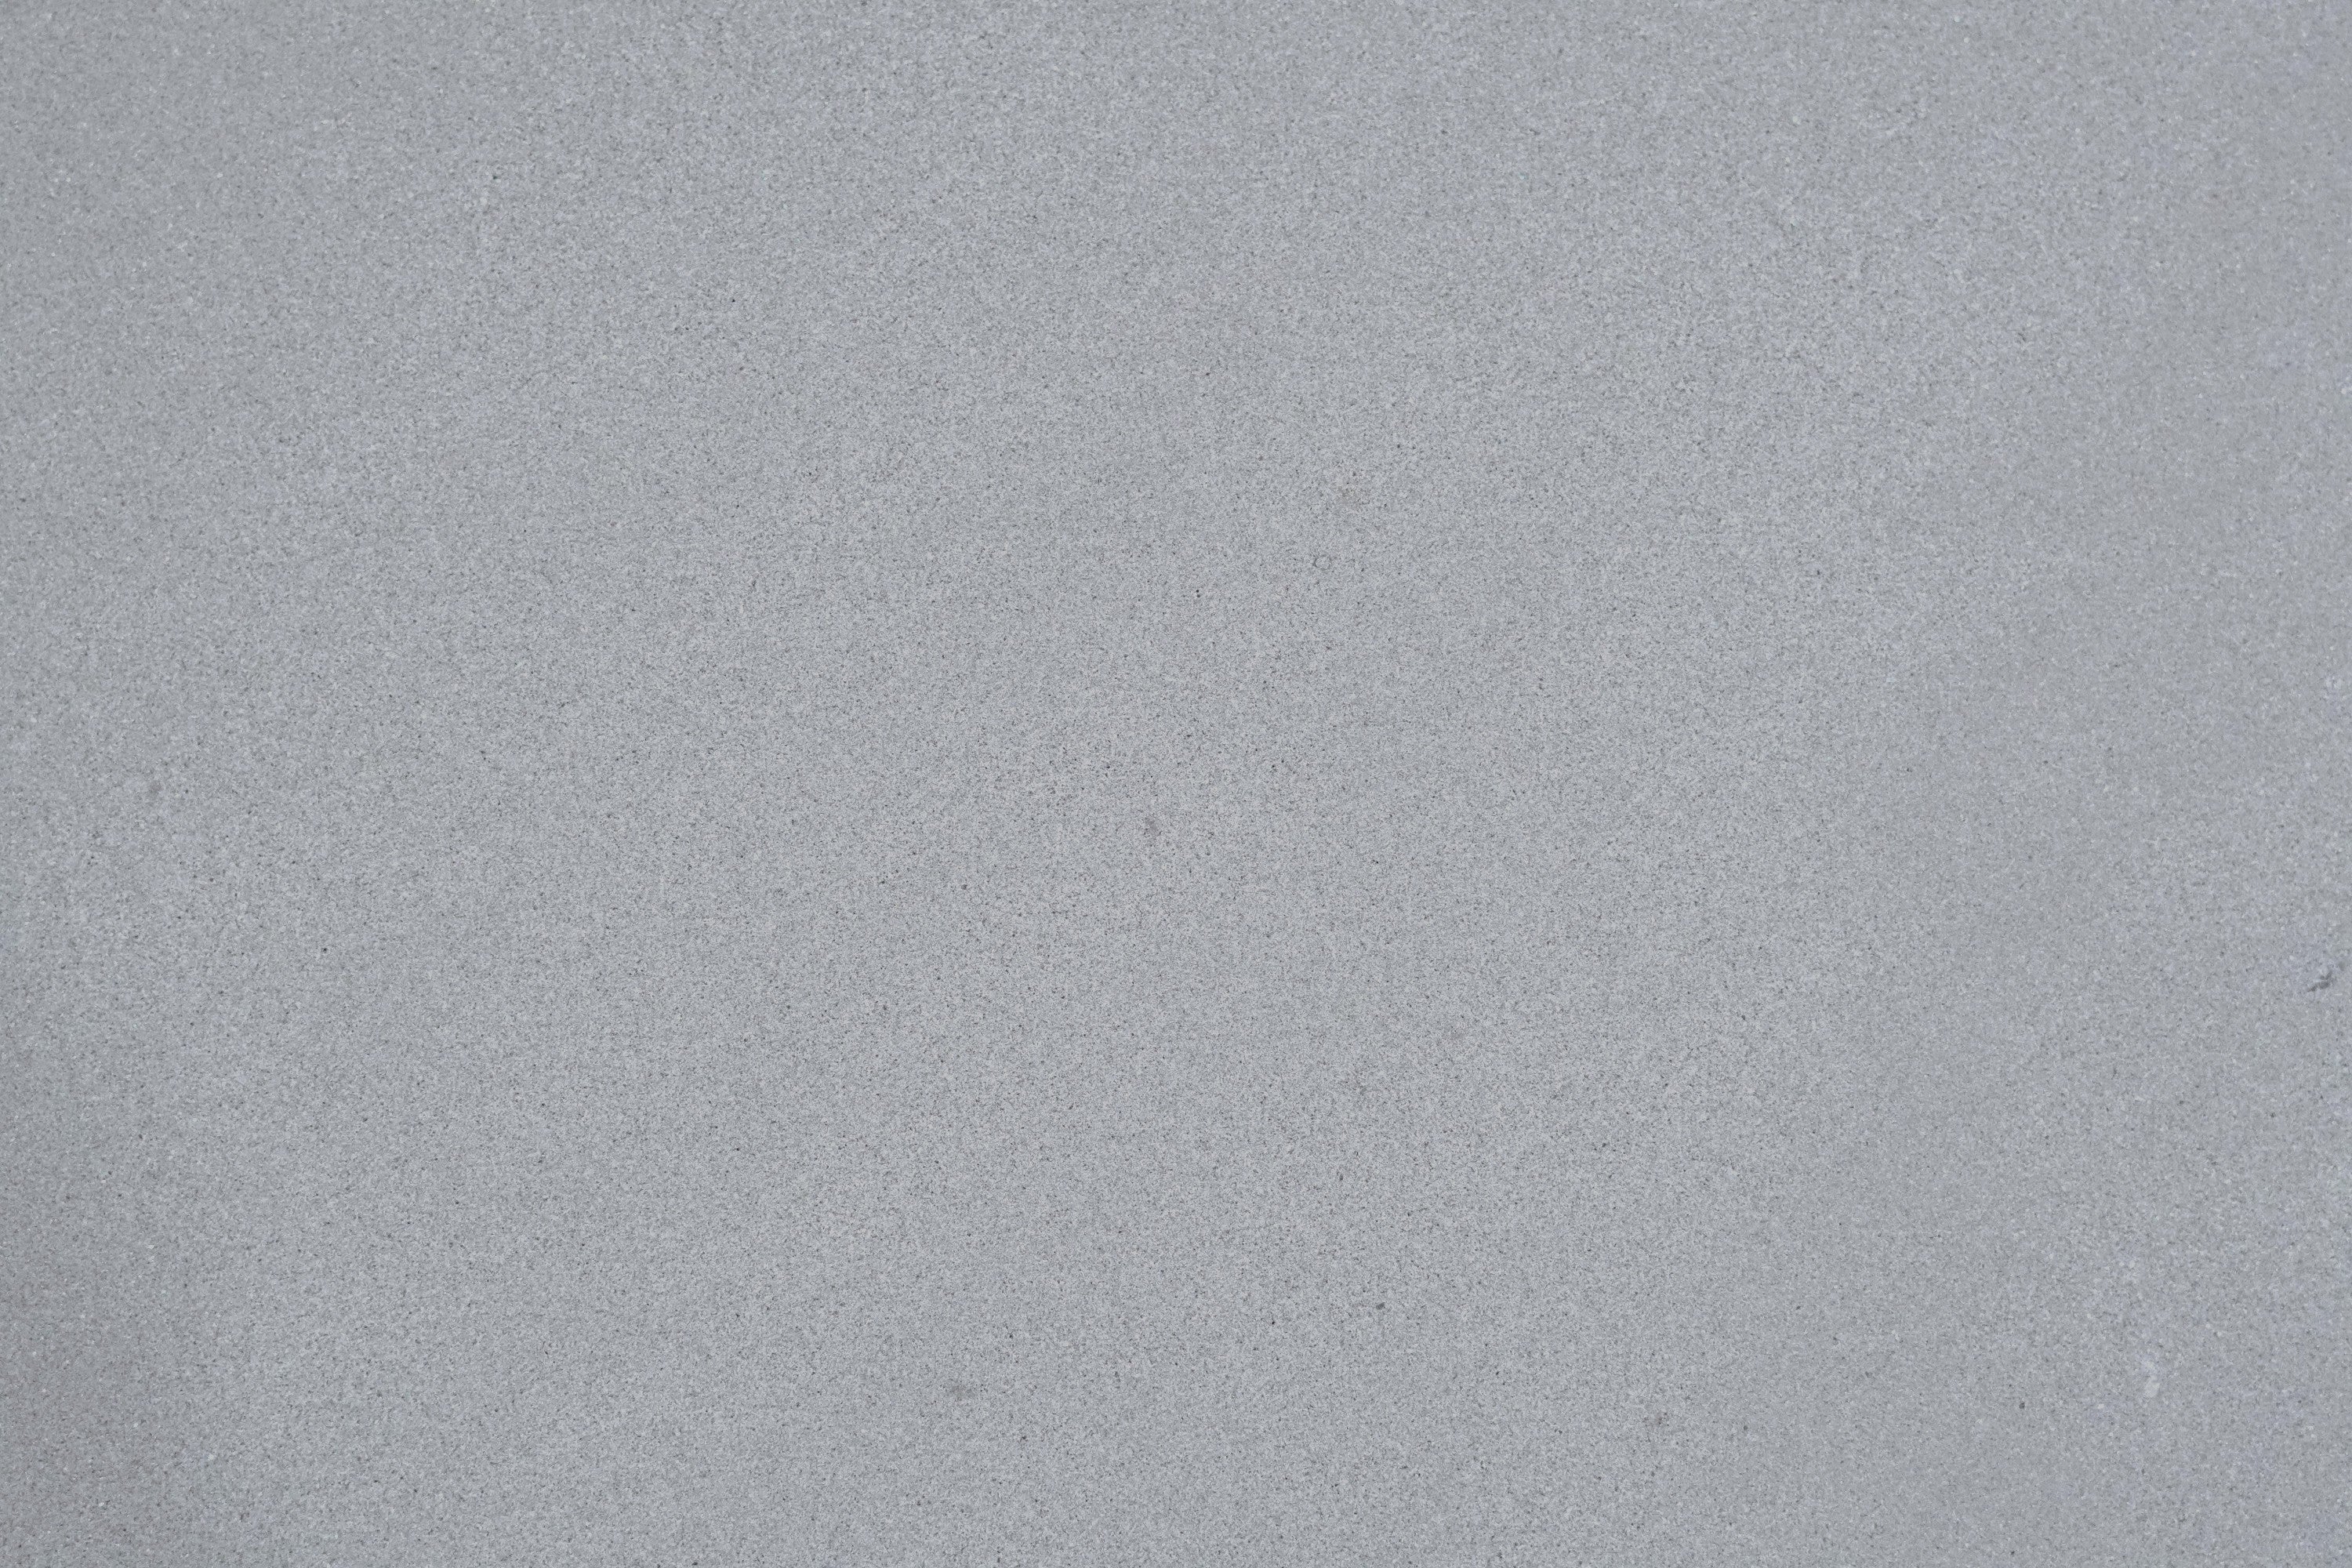 gray brocade natural limestone field tile pietra serena width of 16 length of 16 and thickness of 0.75 sold to you by surface group international